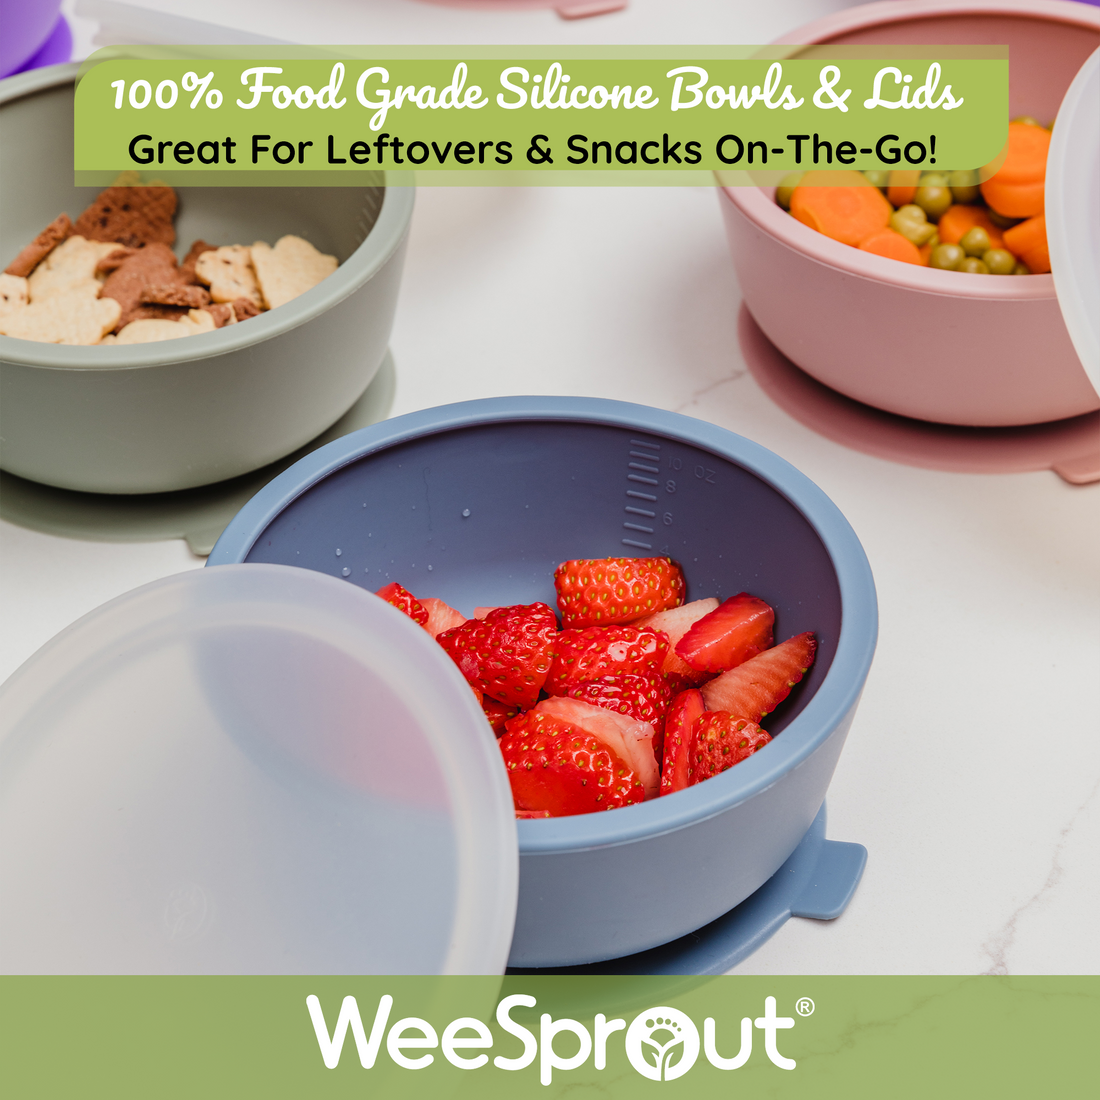 honestreview of the @Weesprout bowls! We love them